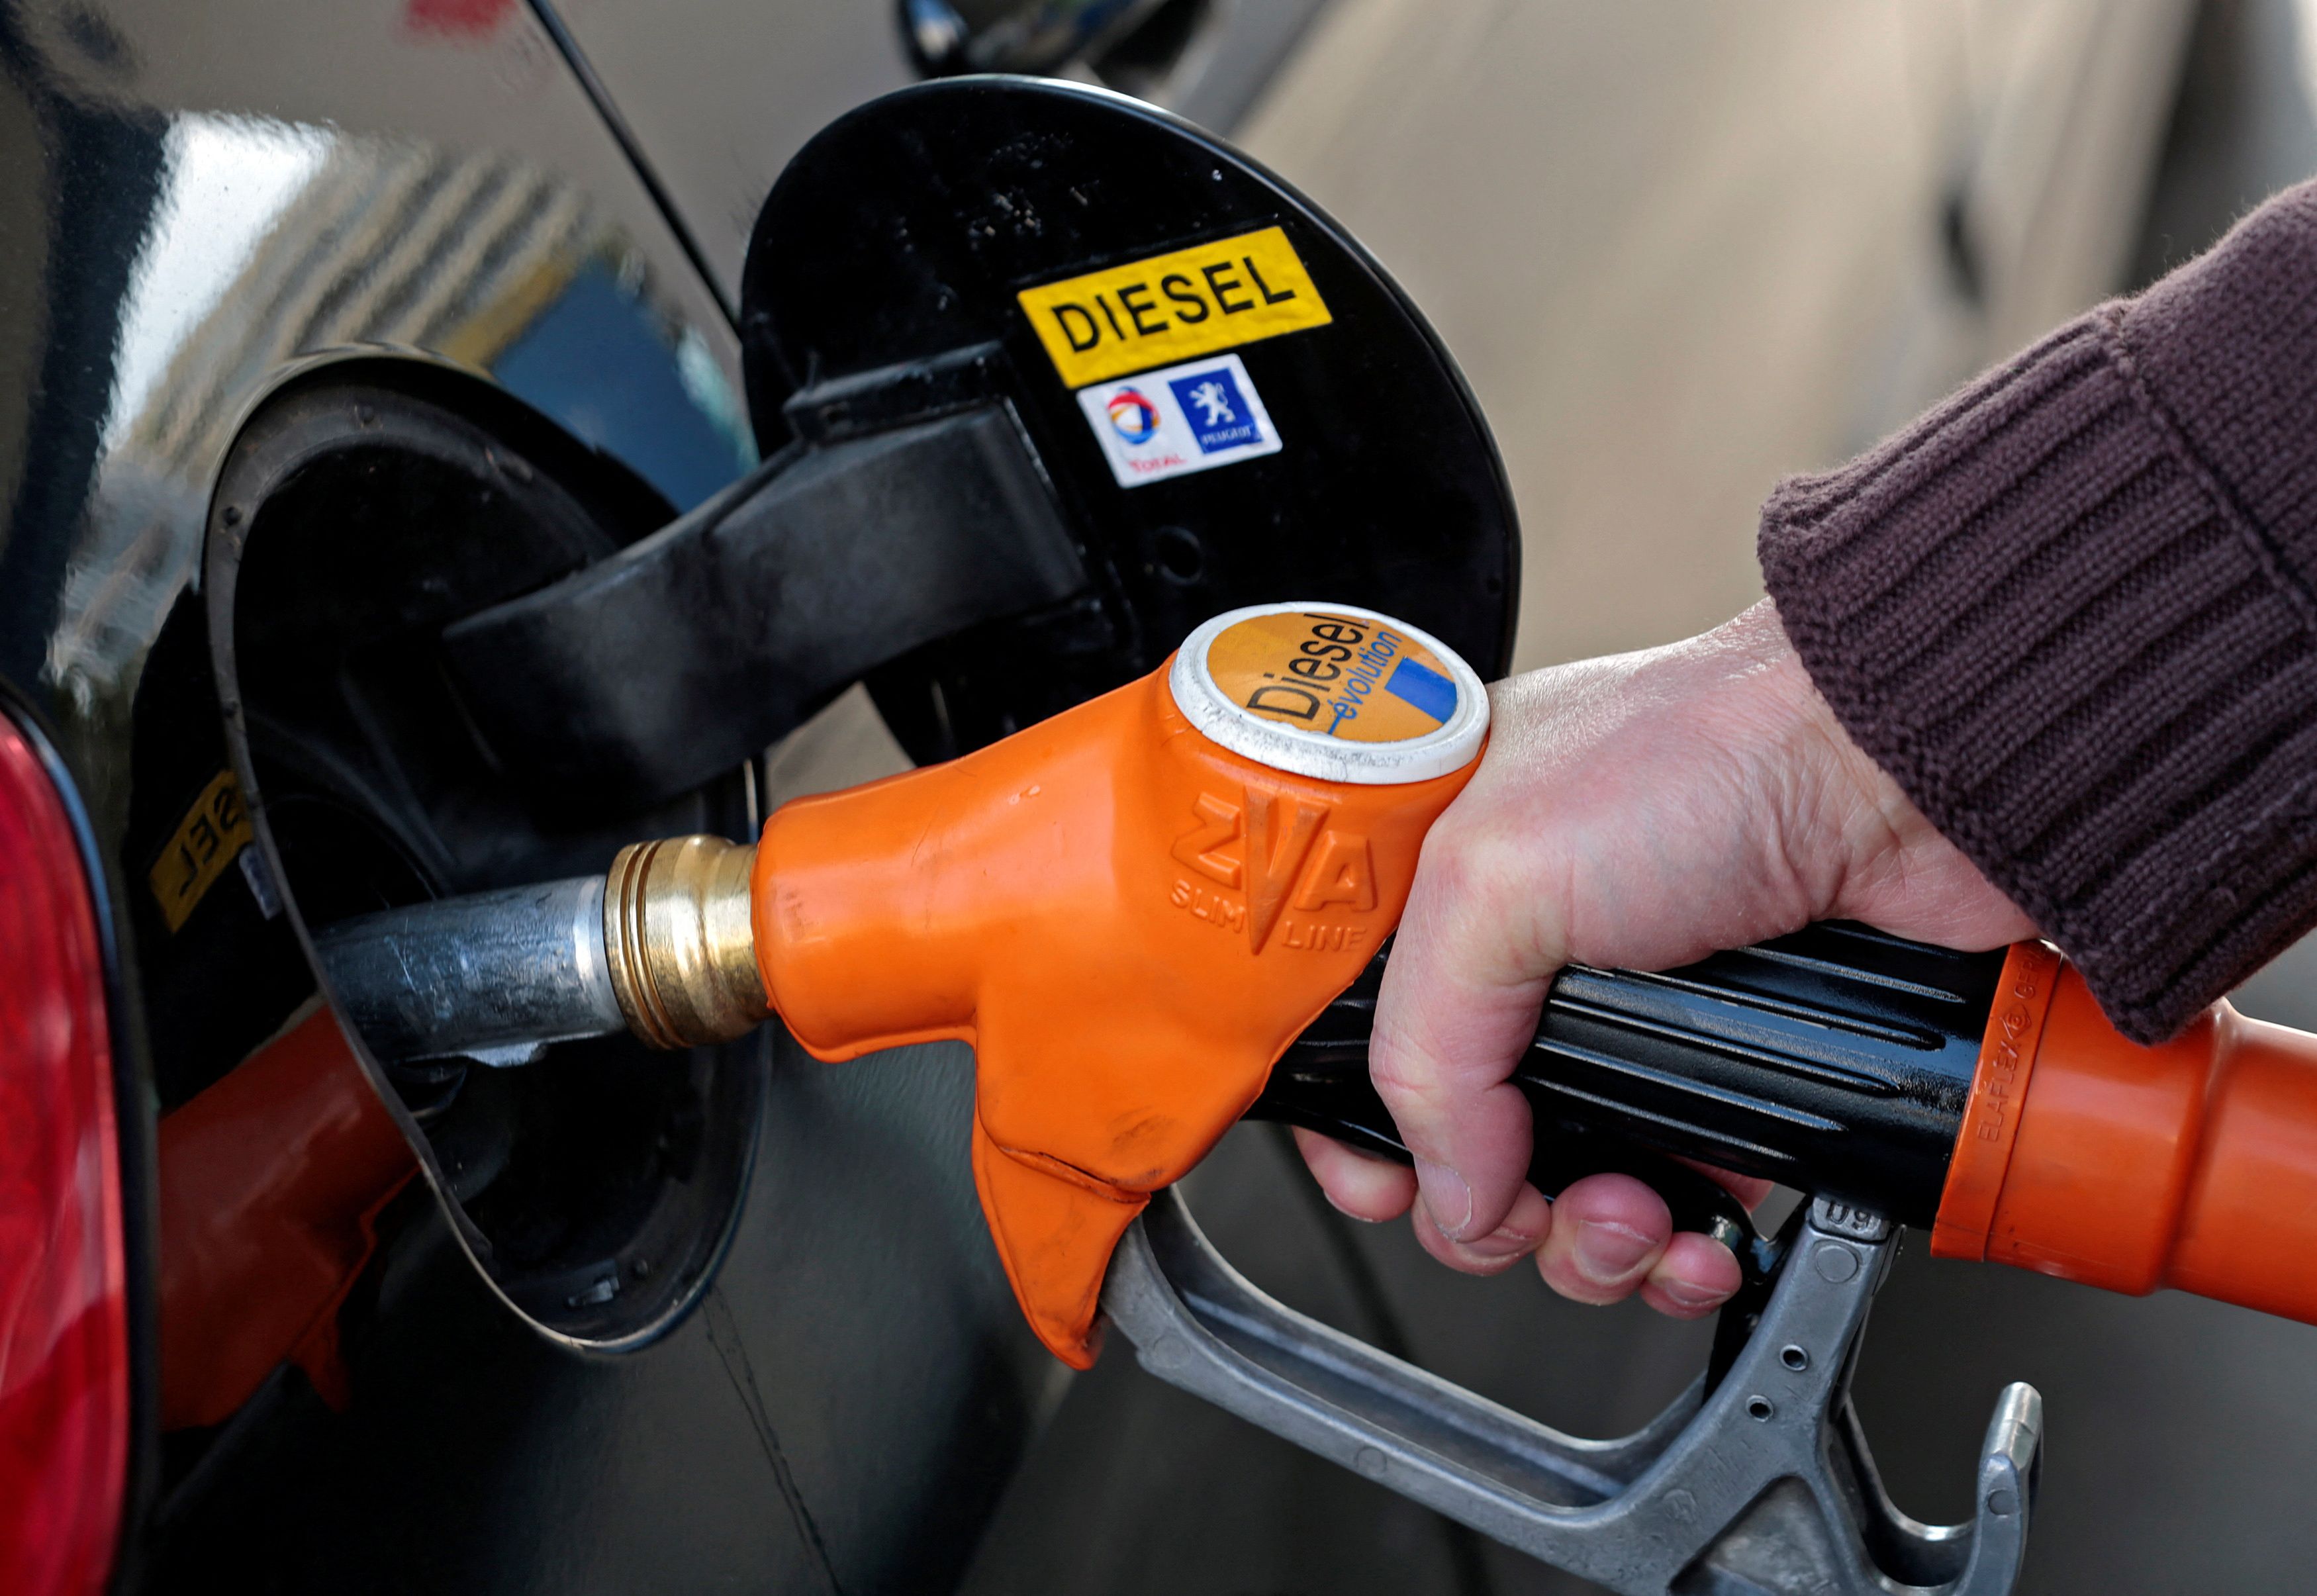 A customer fills-up his car with diesel at a gas station in Nice